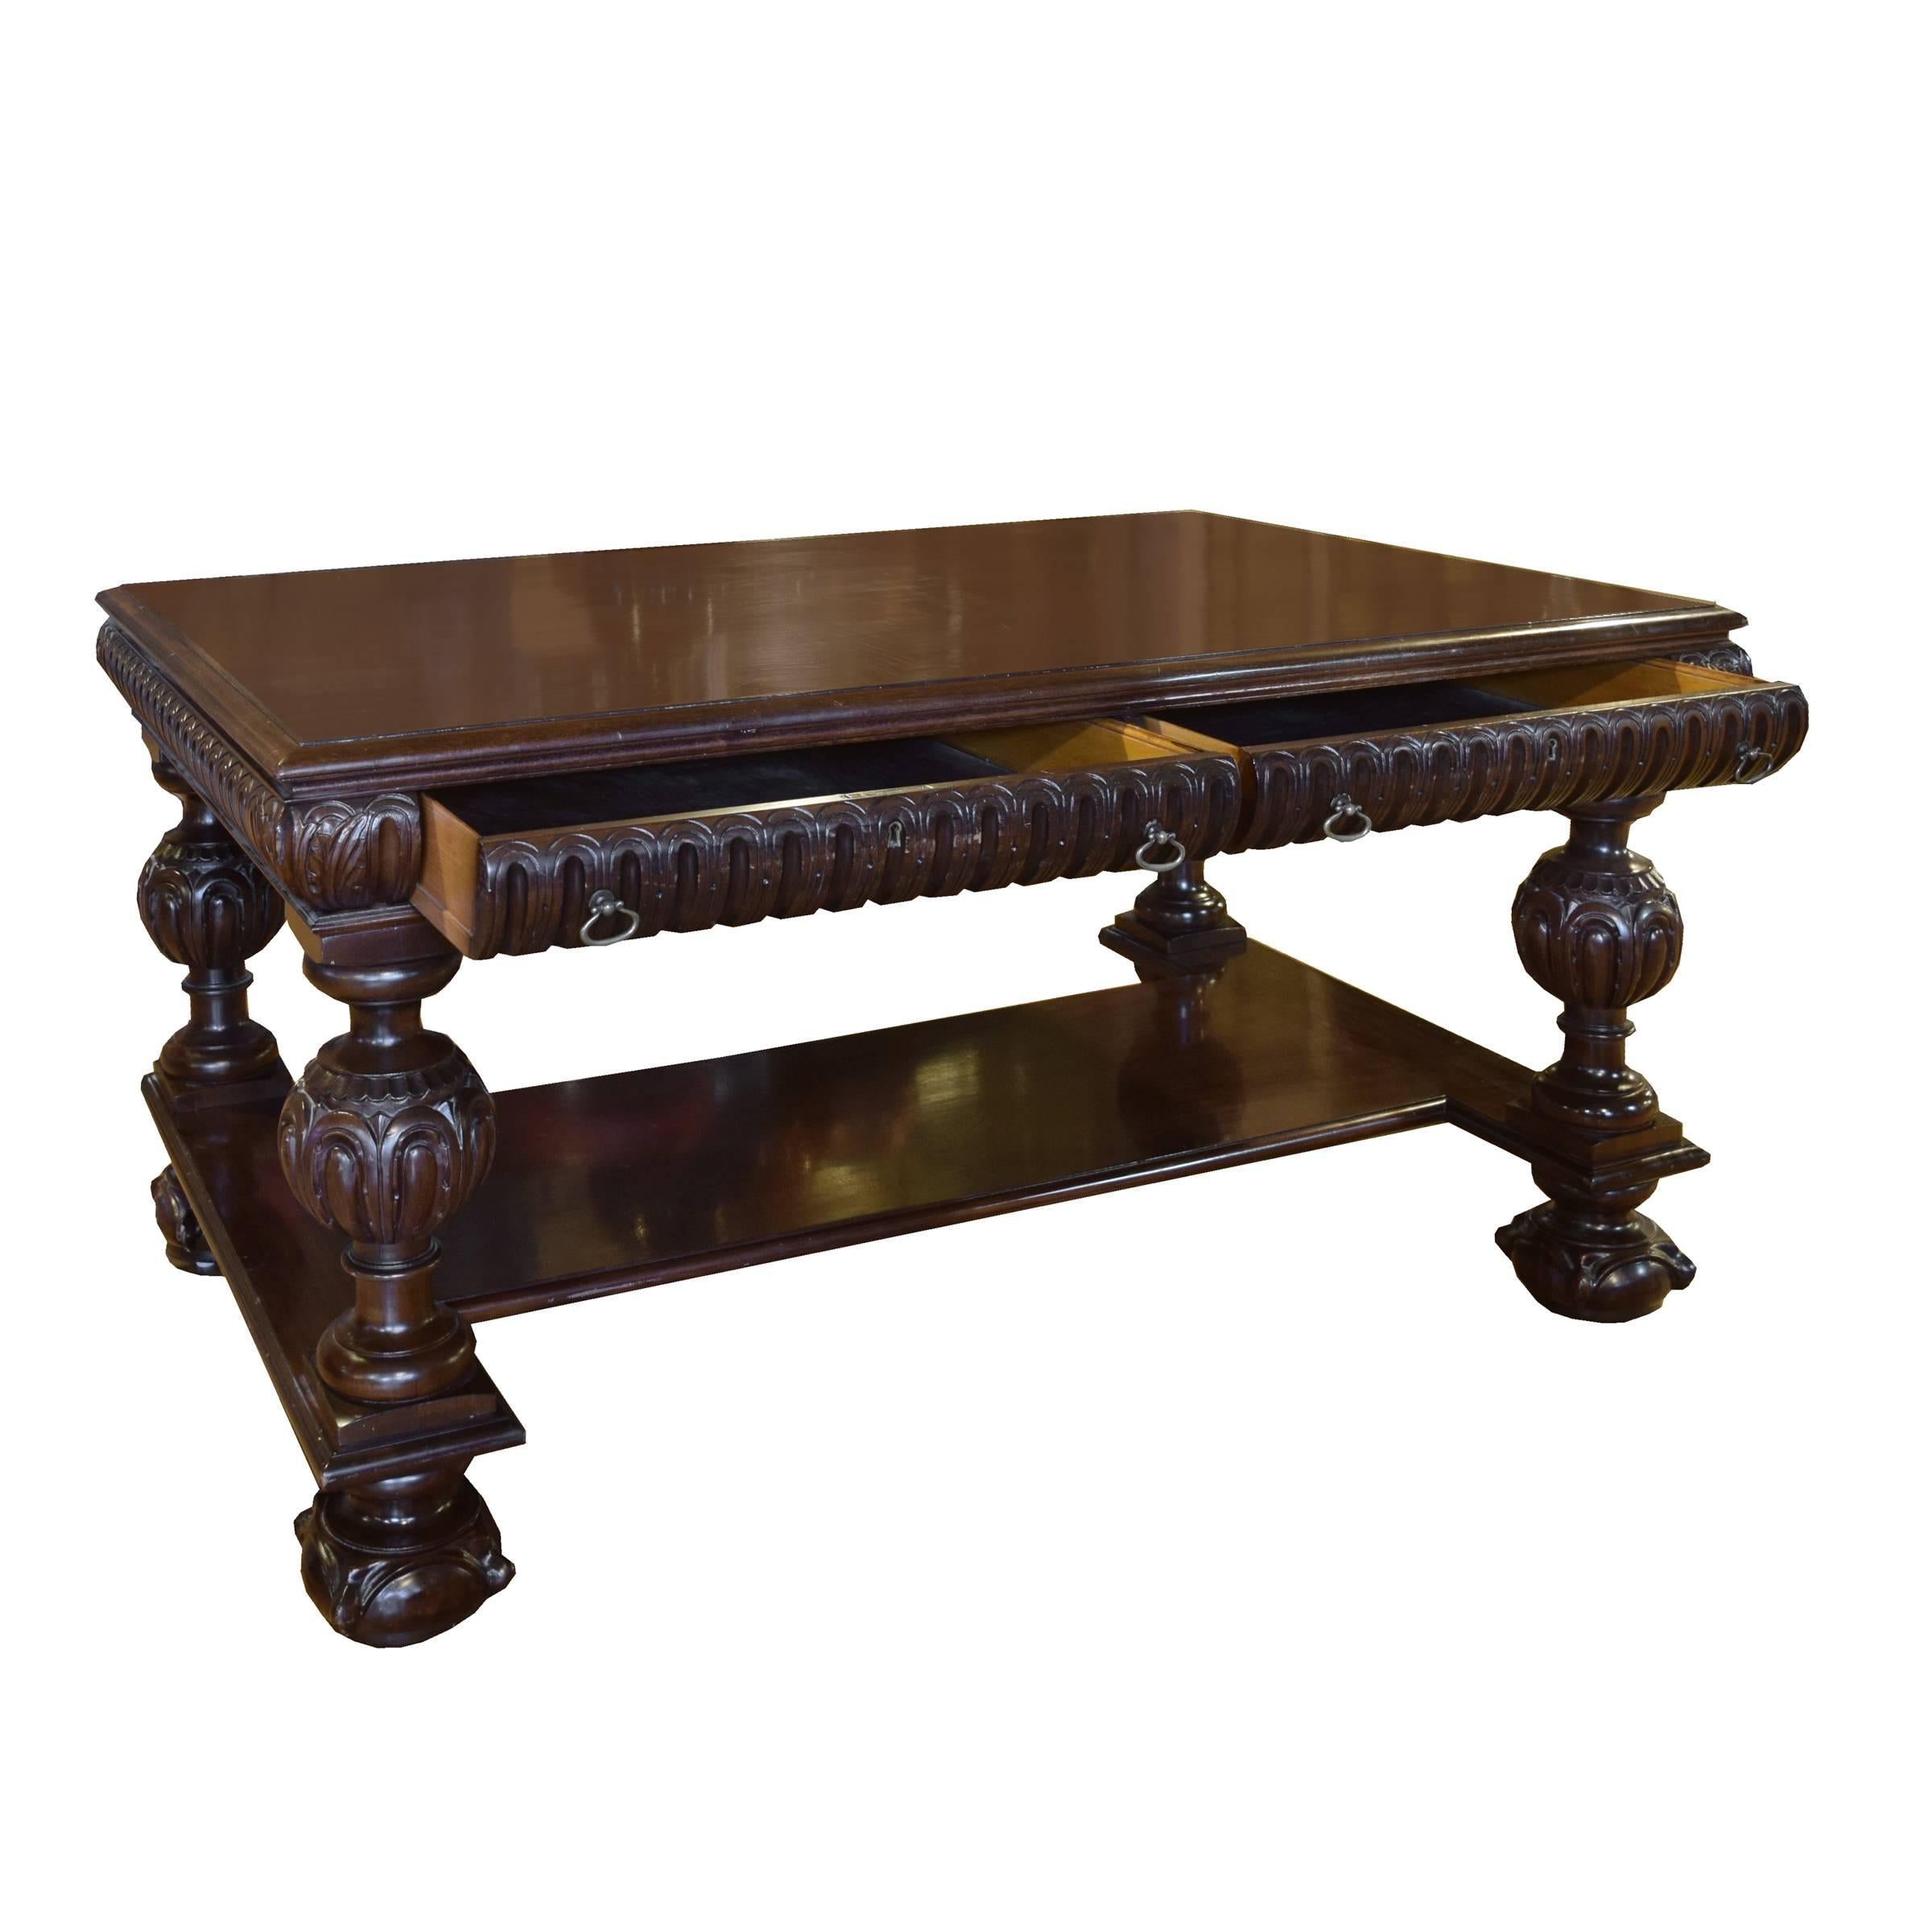 An American mahogany two-drawer desk with wonderfully carved legs, circa 1920.